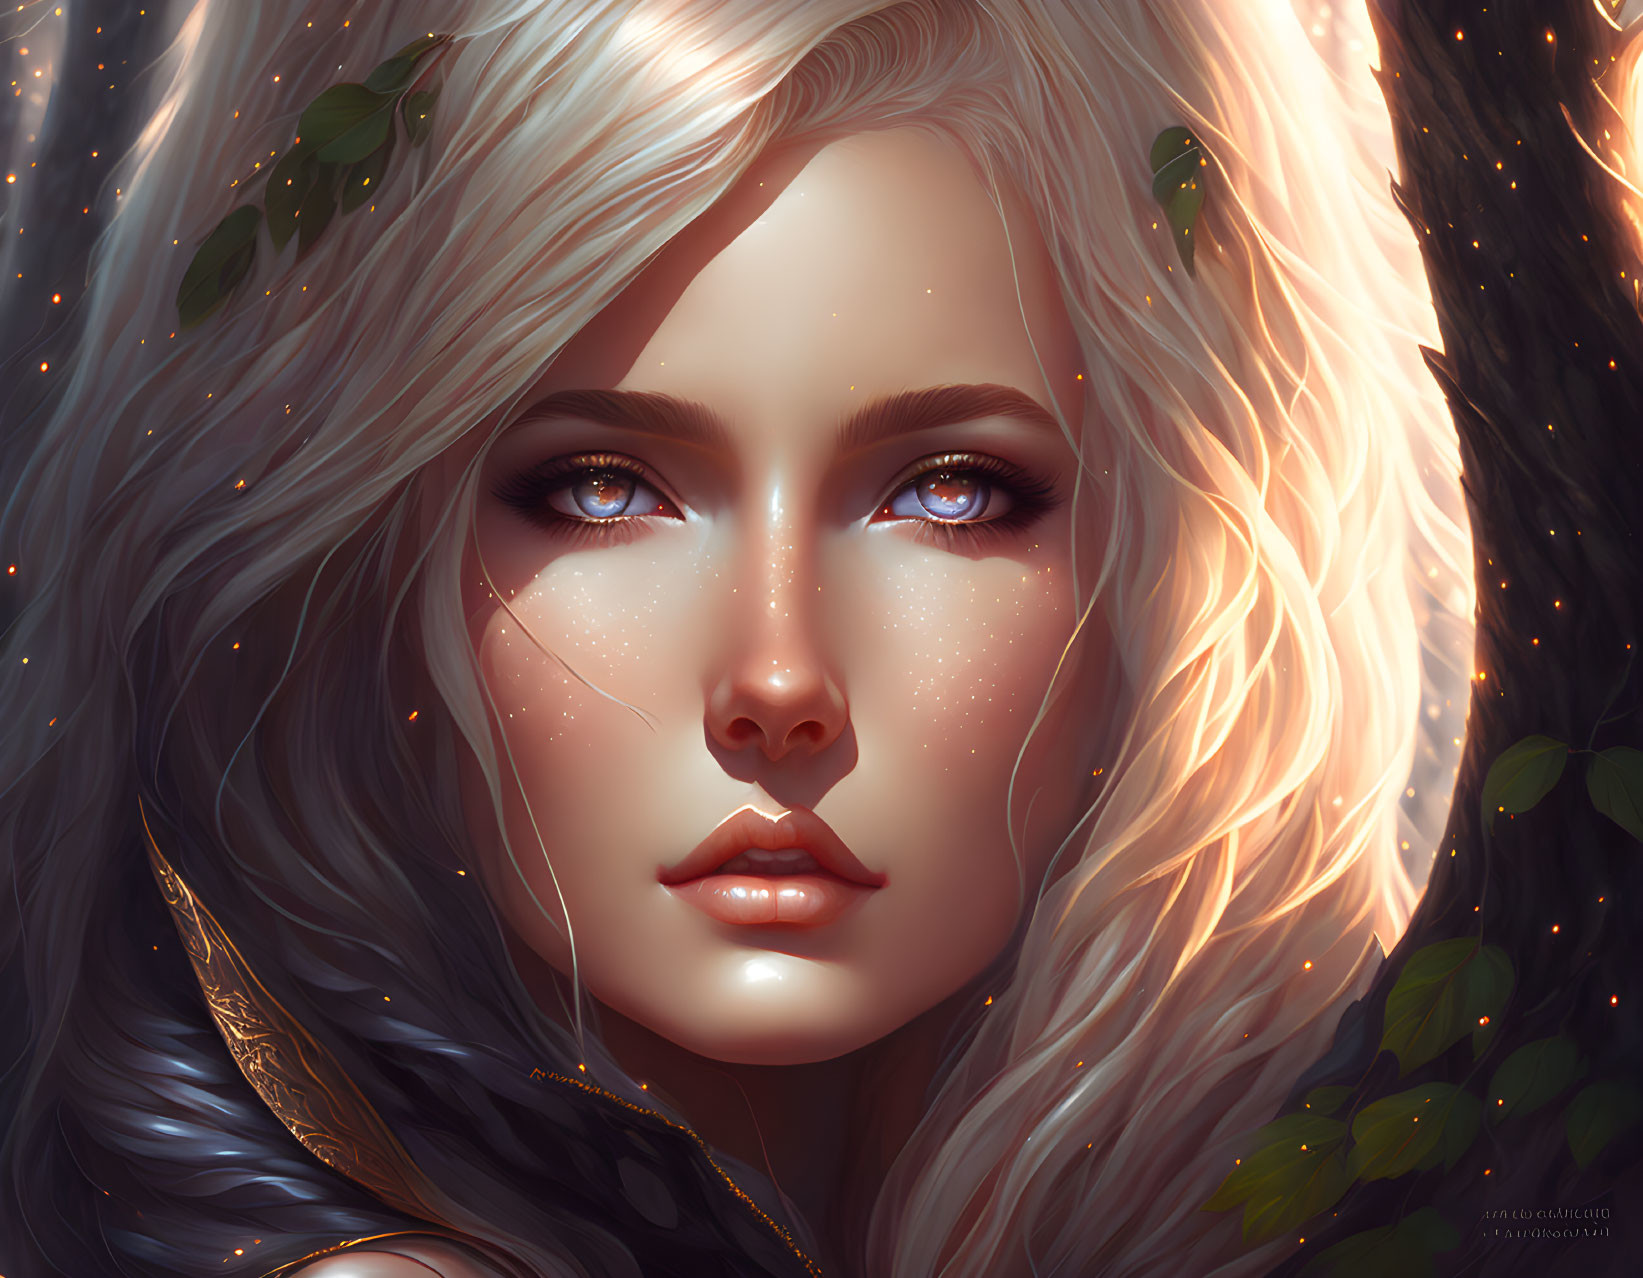 Fantasy character digital portrait with luminescent blue eyes and platinum blonde hair.